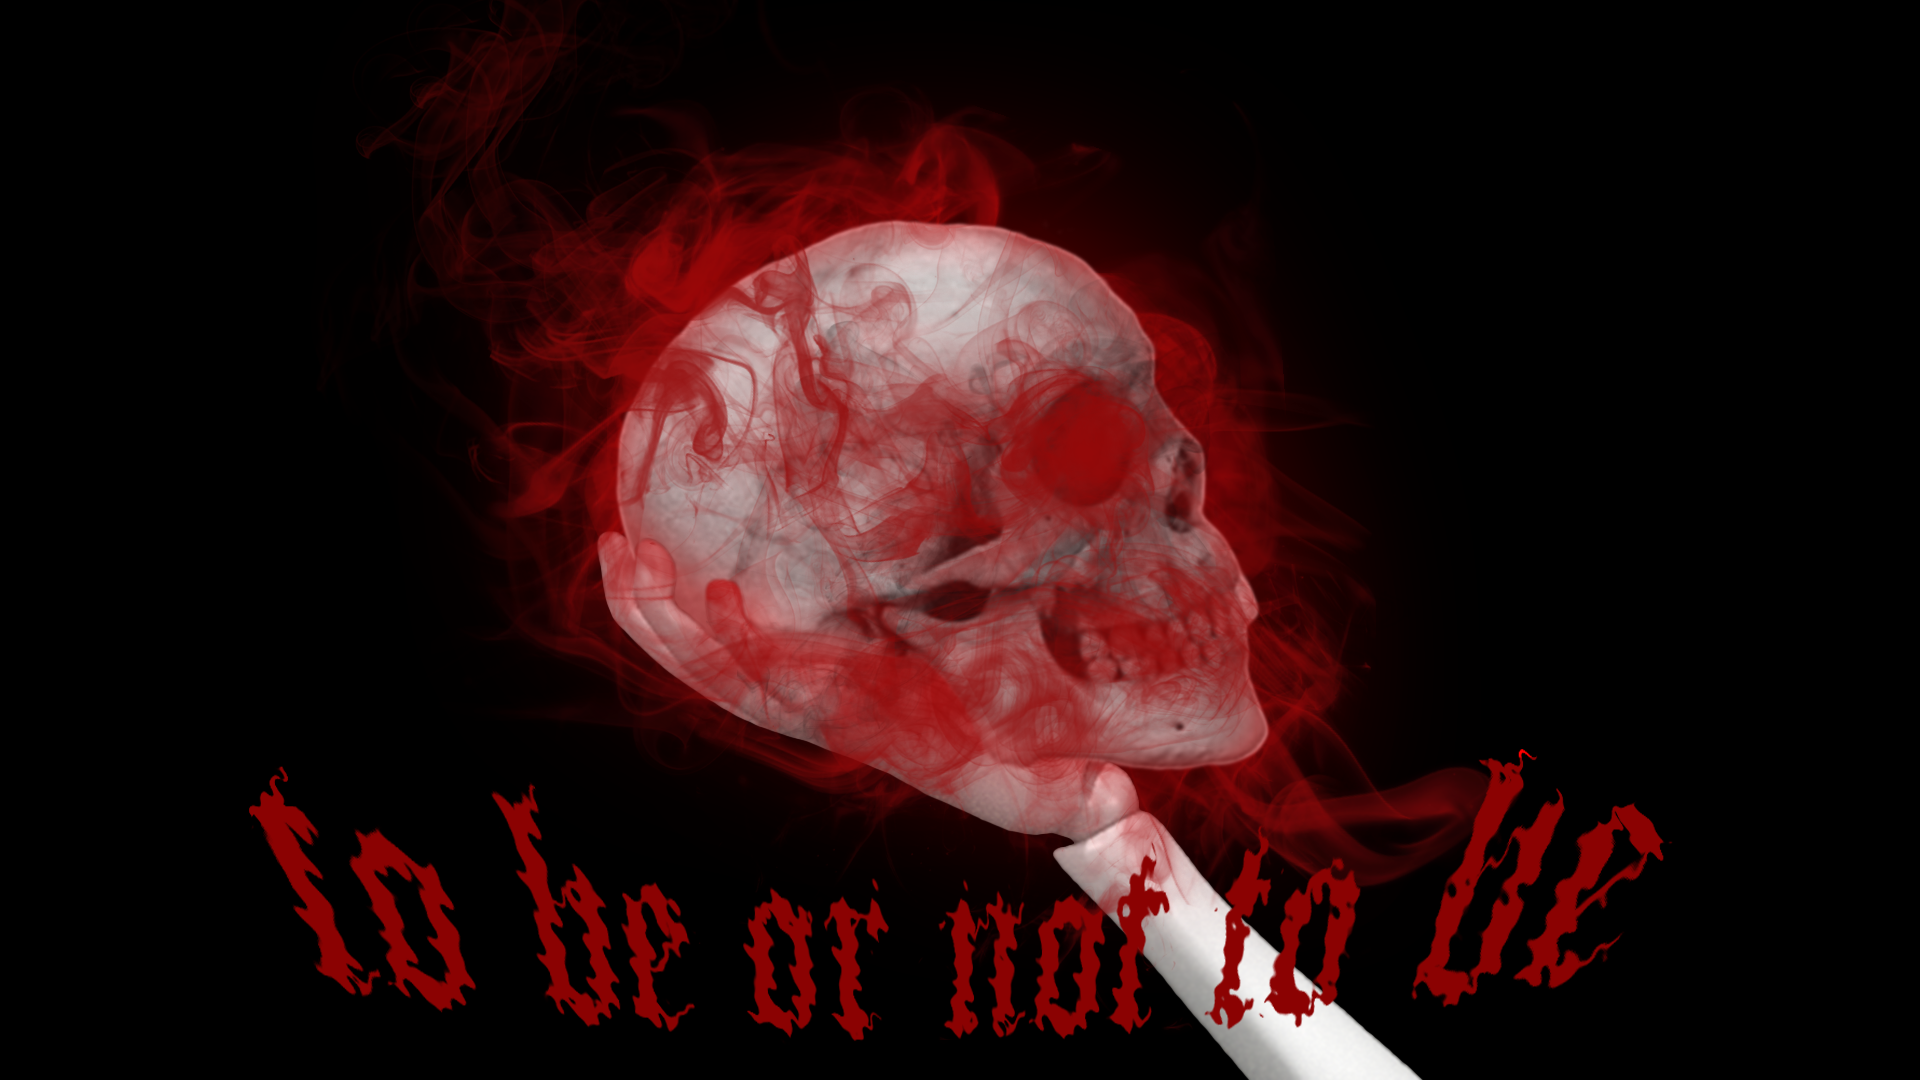 To be or not to be HD Wallpaper. Background Imagex1080